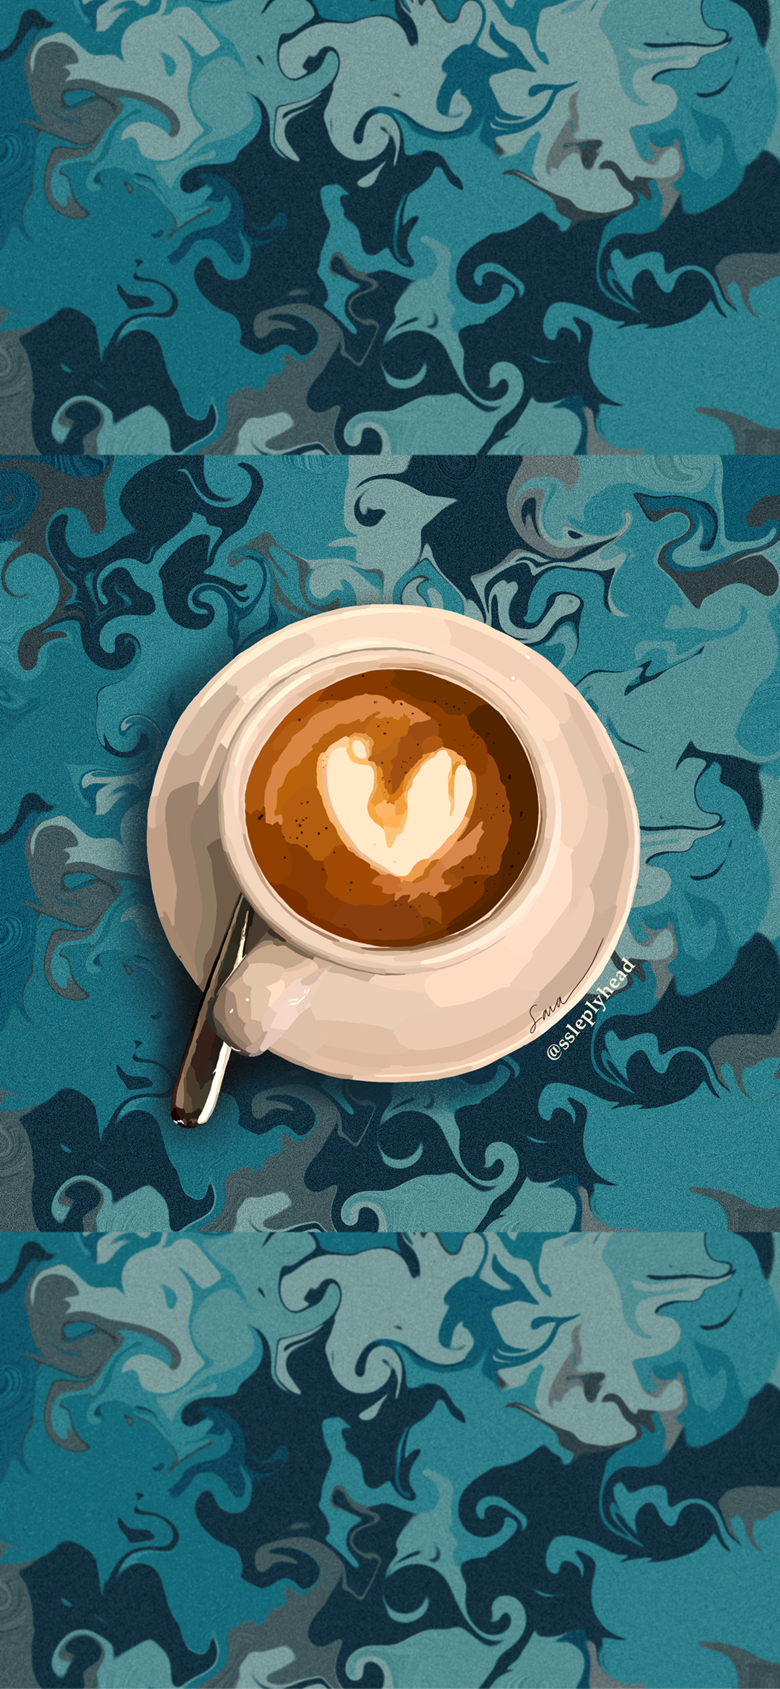 Coffe With Love Ssleeplyhead S Ko Fi Shop Ko Fi Where Creators Get Support From Fans Through Donations Memberships Shop Sales And More The Original Buy Me A Coffee Page